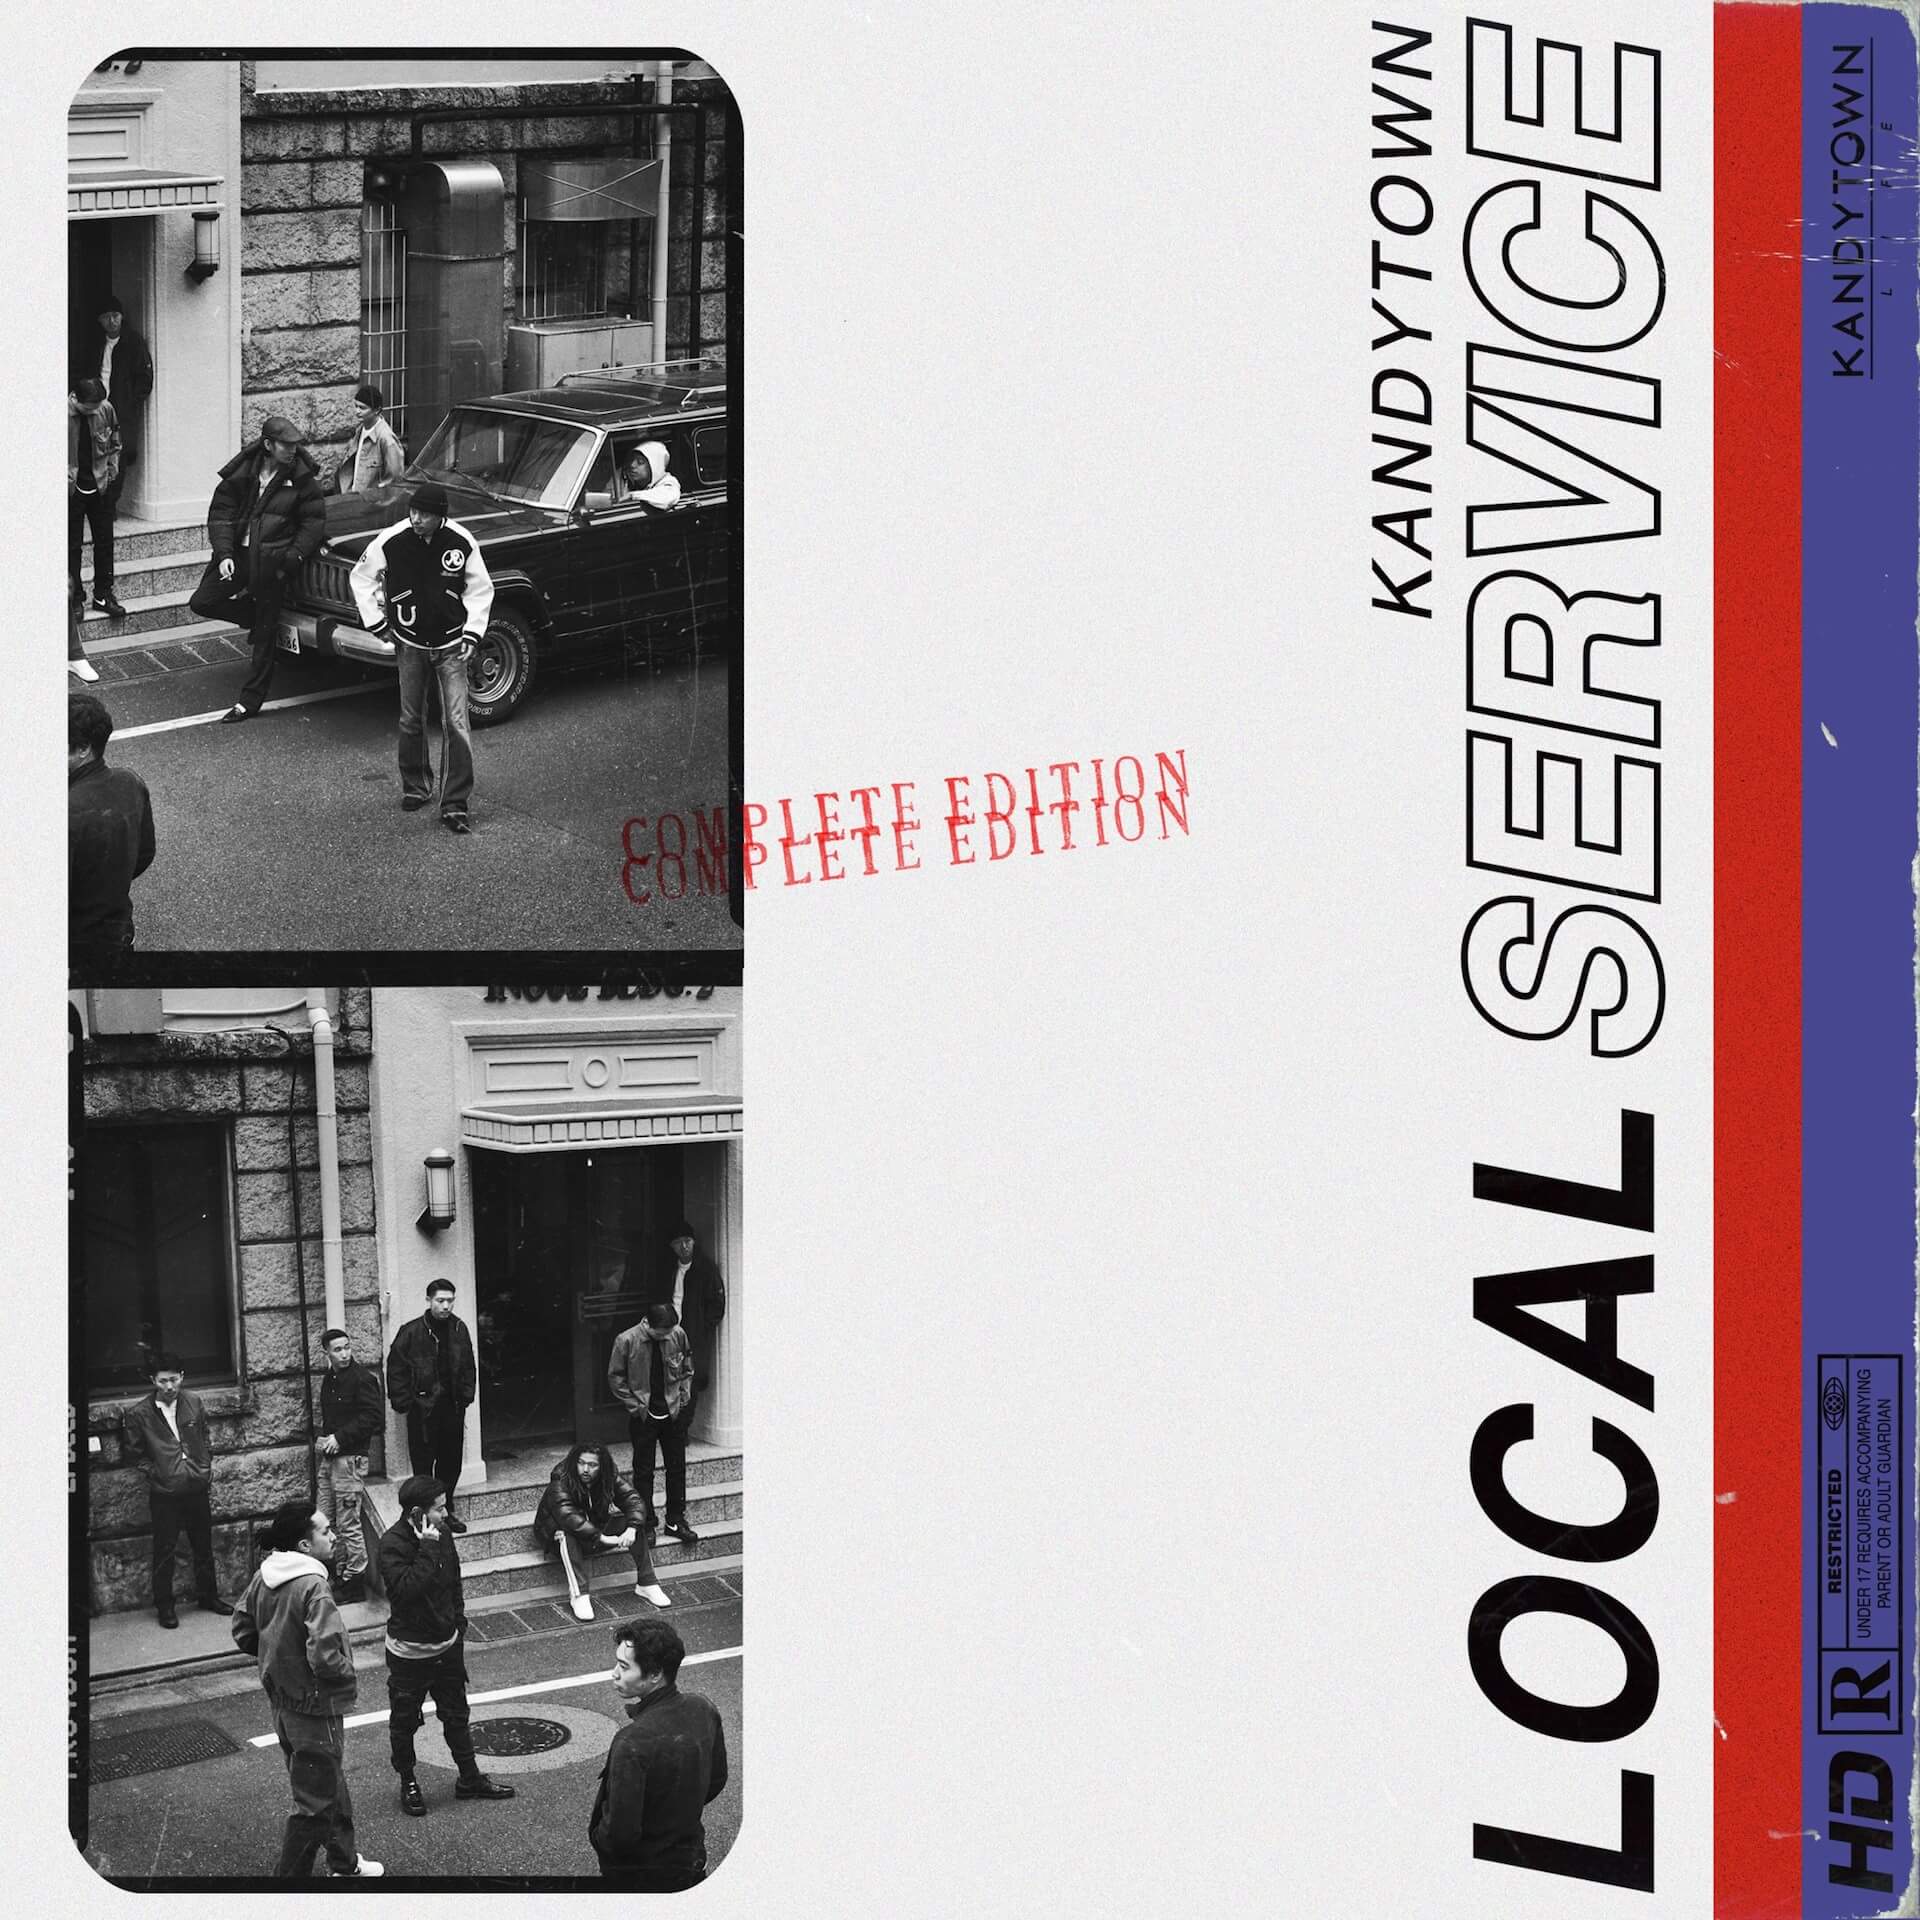 KANDYTOWNの2nd EP『LOCAL SERVICE 2』がリリース決定｜“One More Dance”が本日より先行配信スタート music210204_kandytown_localservice2_2